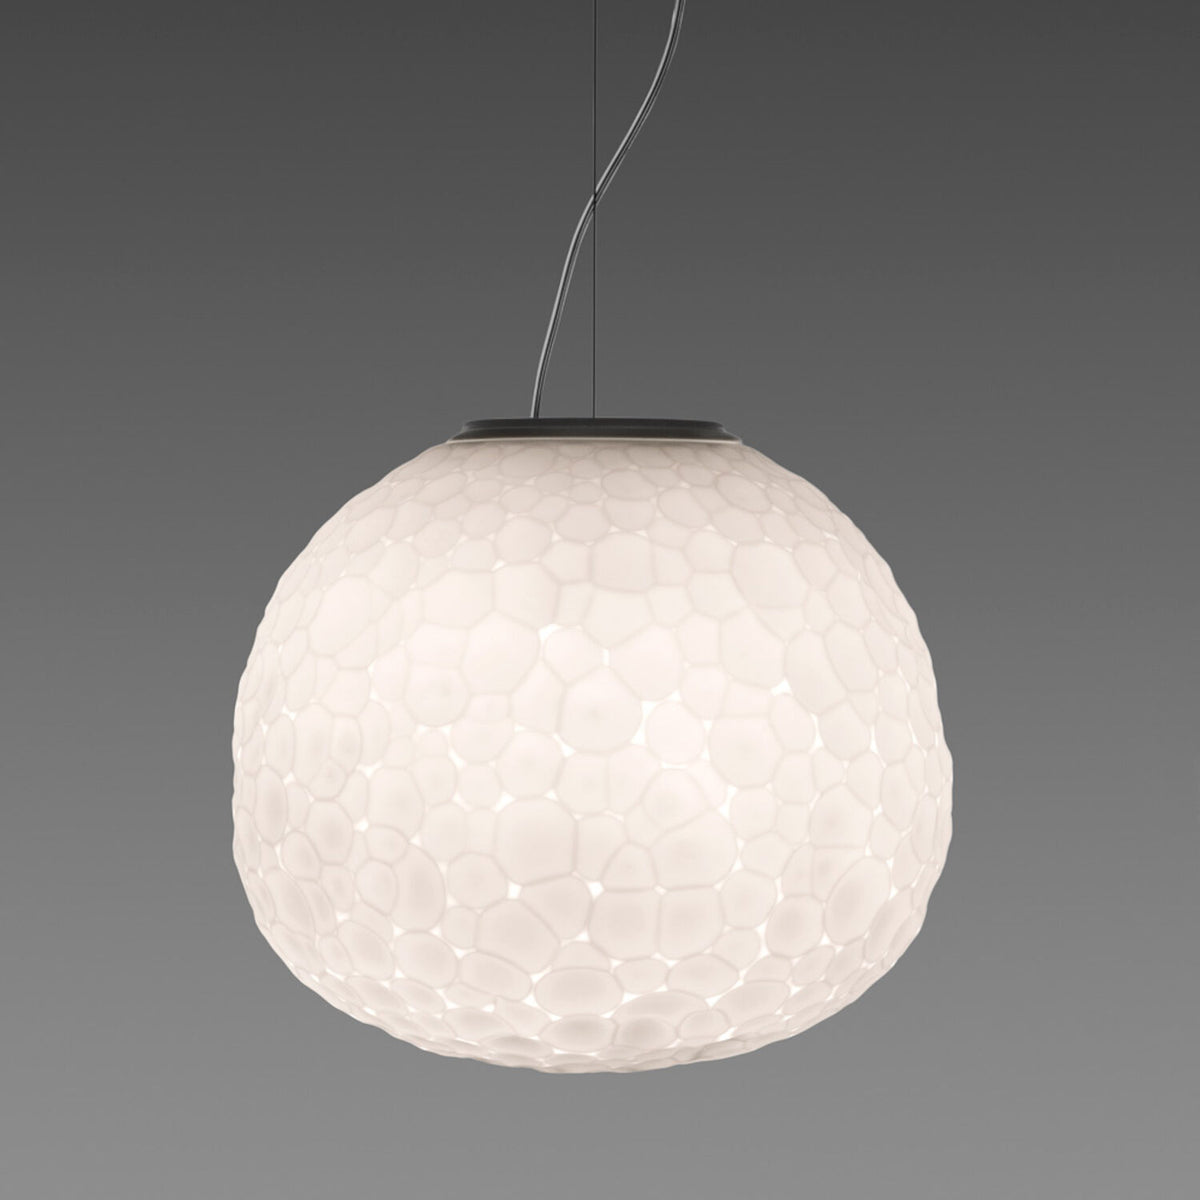 METEORITE 18.88-INCH LED PENDANT LIGHT WITH EXTENDED LENGTH, 17130-EXT